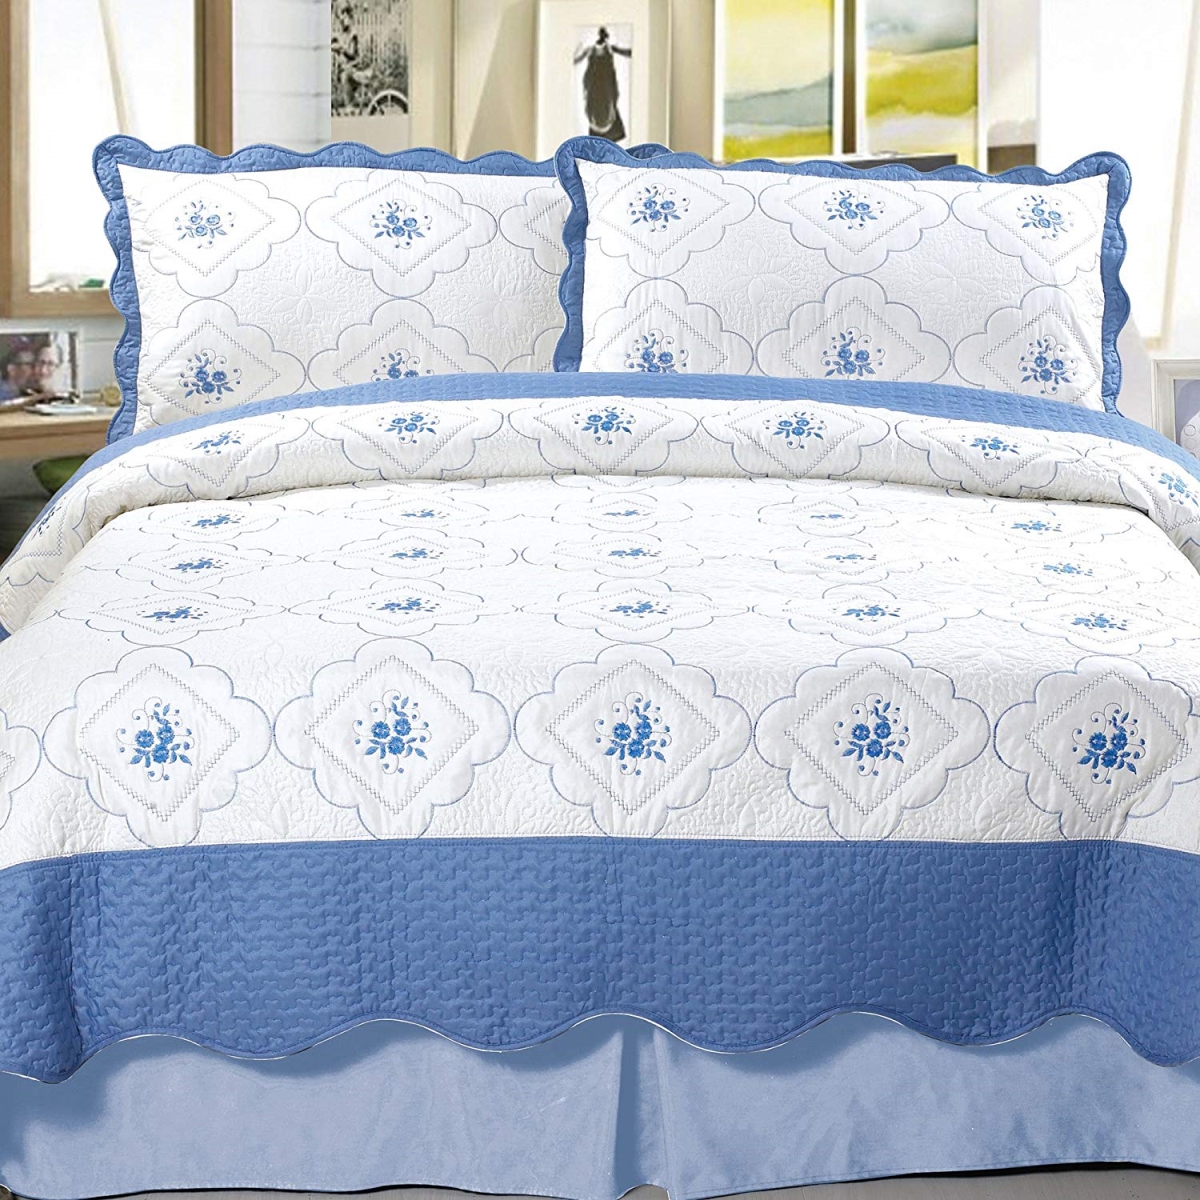 66a-20031 Brianna Embroidered 3 Piece Quilt Set, King Size